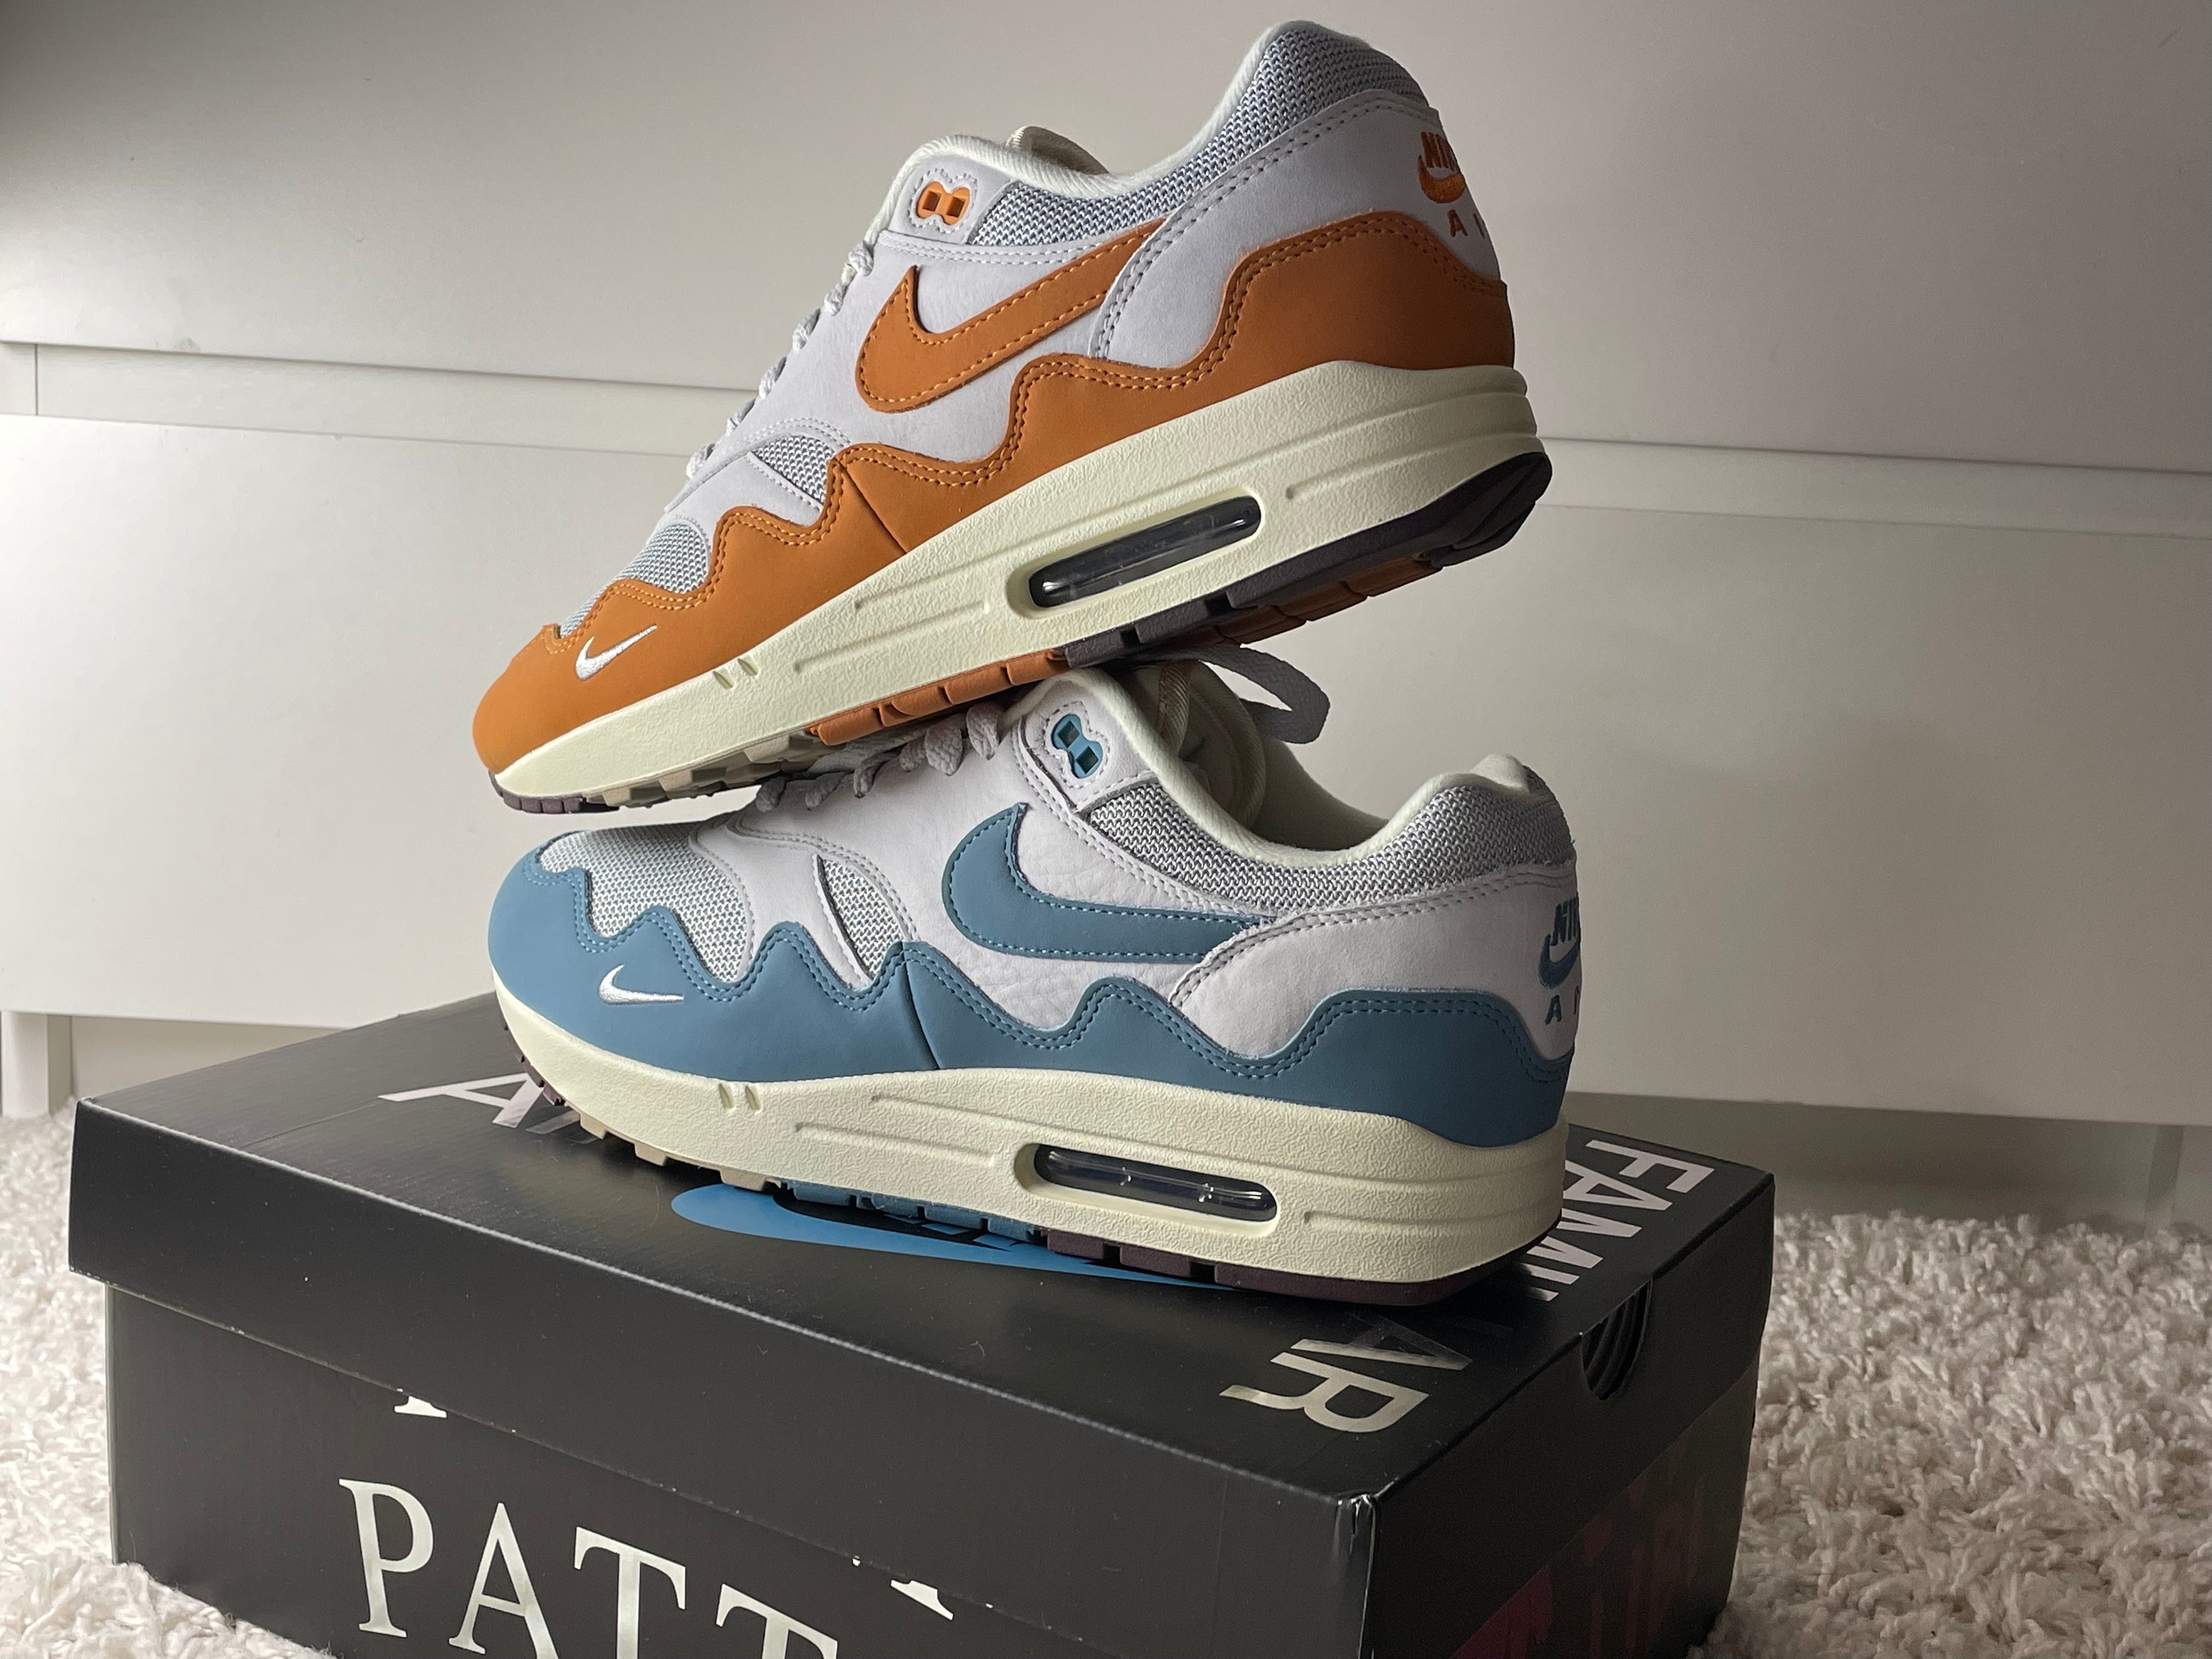 Patta x Air Max 1 Hands-On Review and Comparison – DRIP DROPS